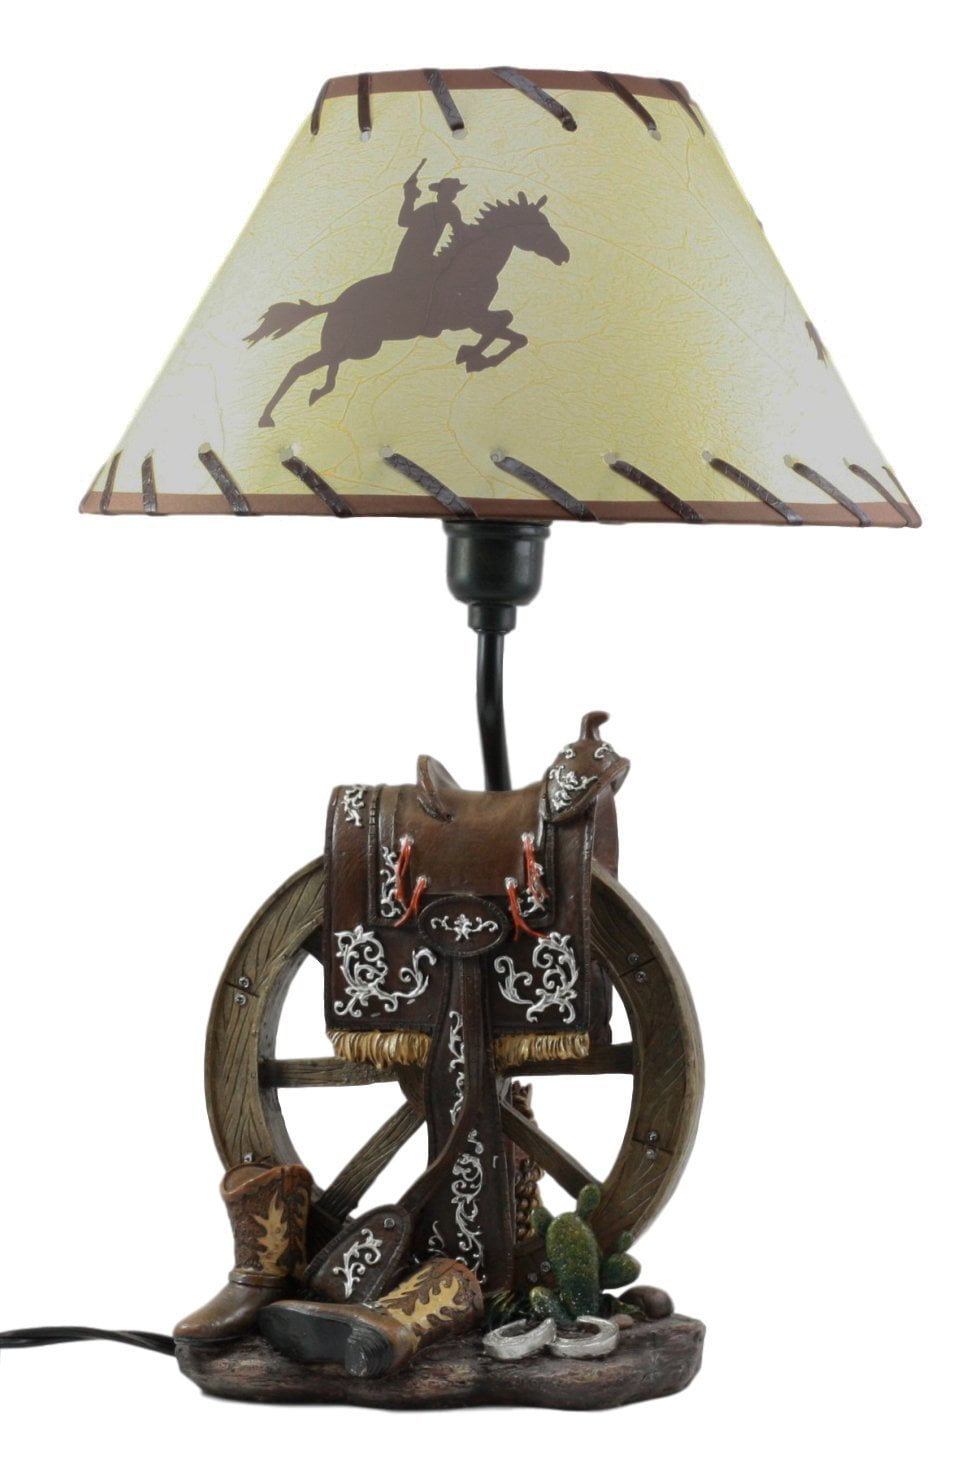 Set 2 TABLE LAMPS COUNTRY WESTERN GIFTS WAGON WHEEL COWBOYS HORSES WOODEN DECOR 